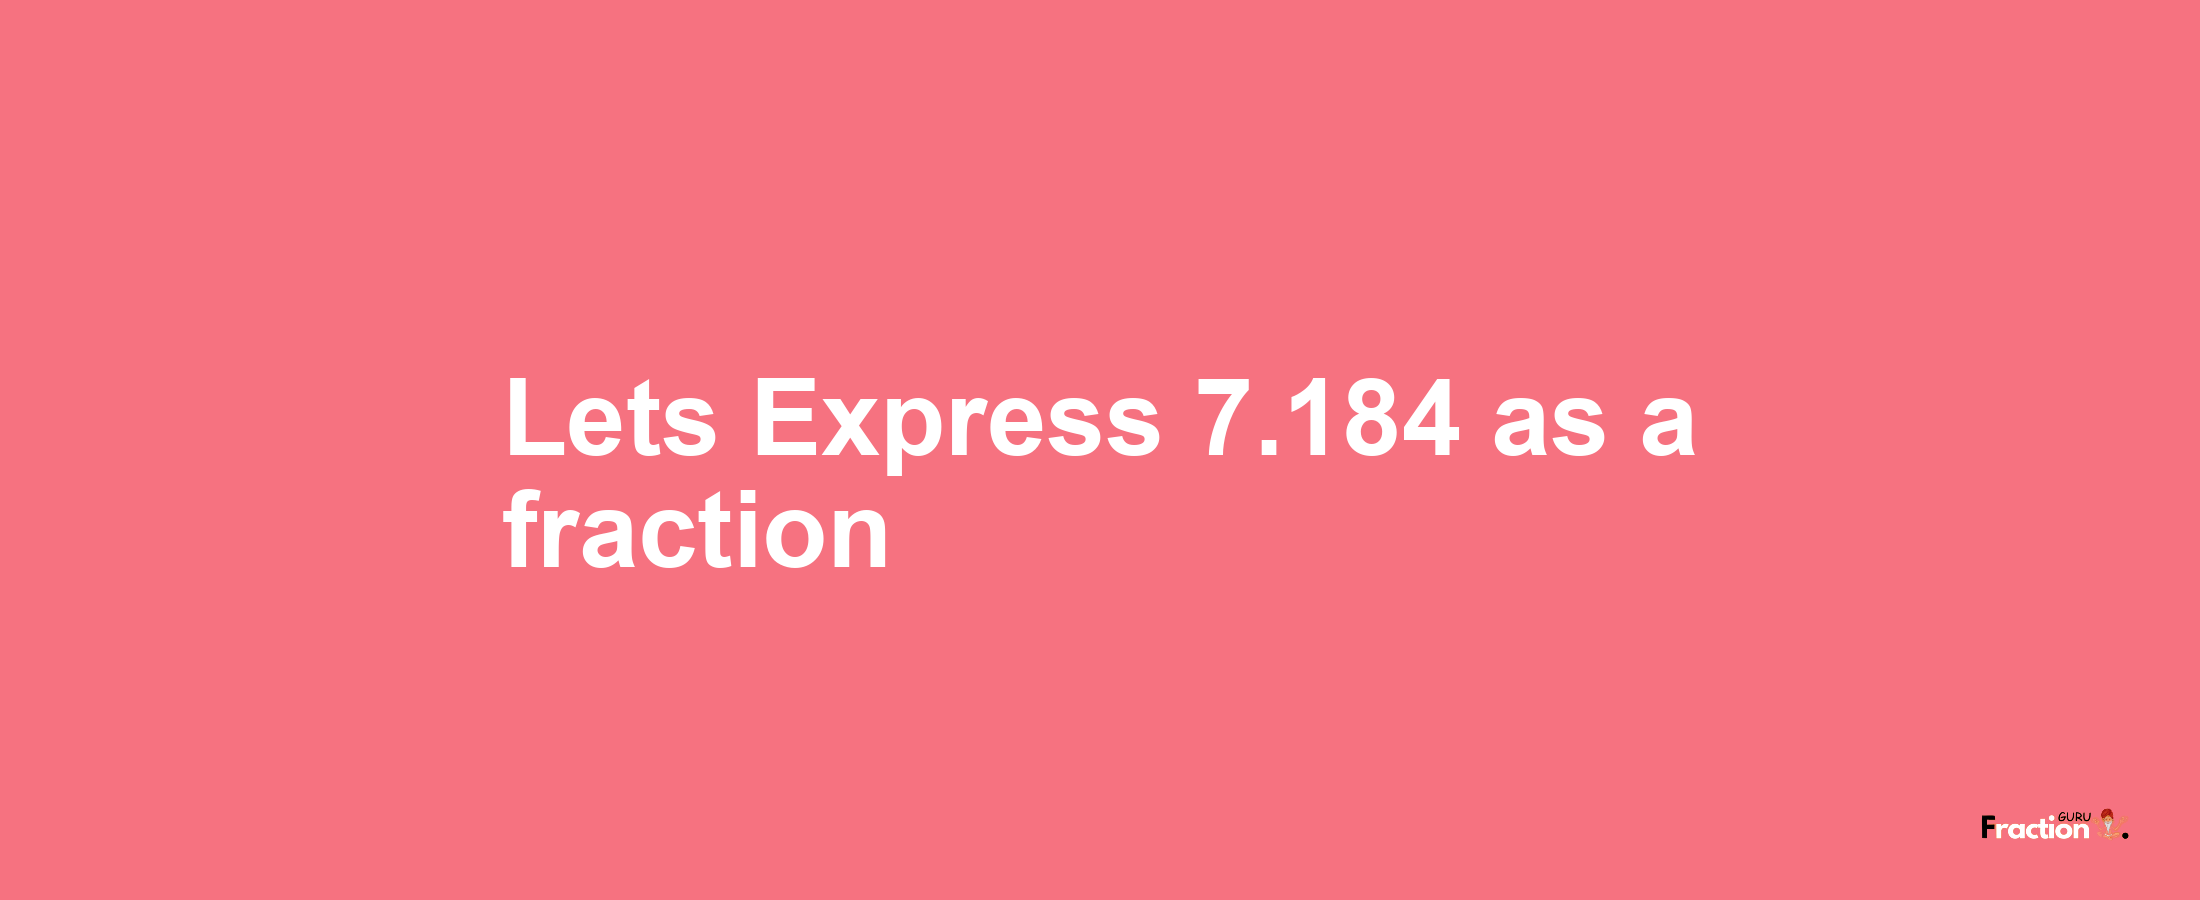 Lets Express 7.184 as afraction